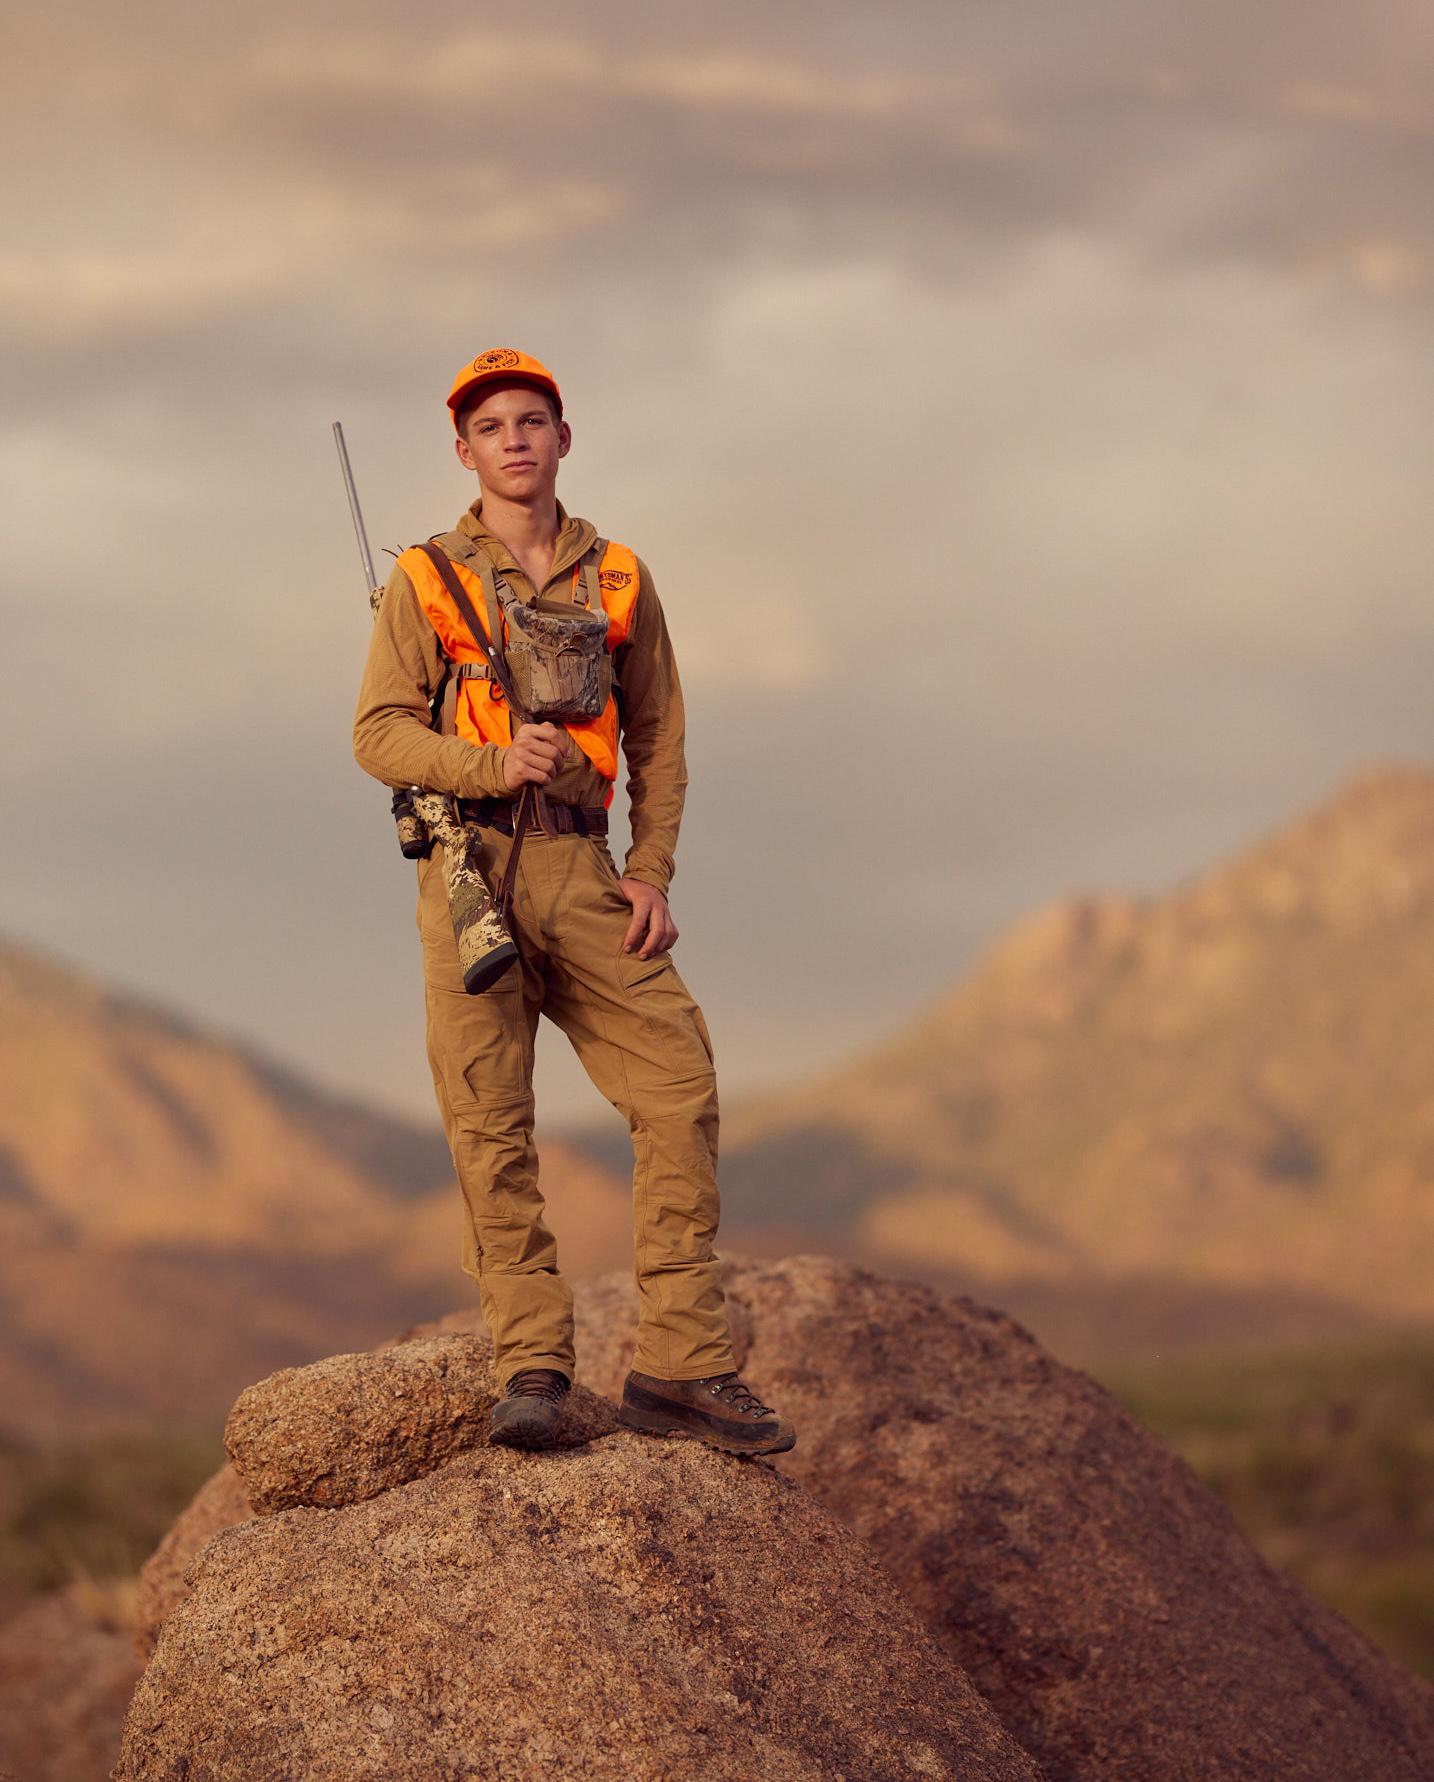 A hunter in an orange vest with a rifle stands on a rock.